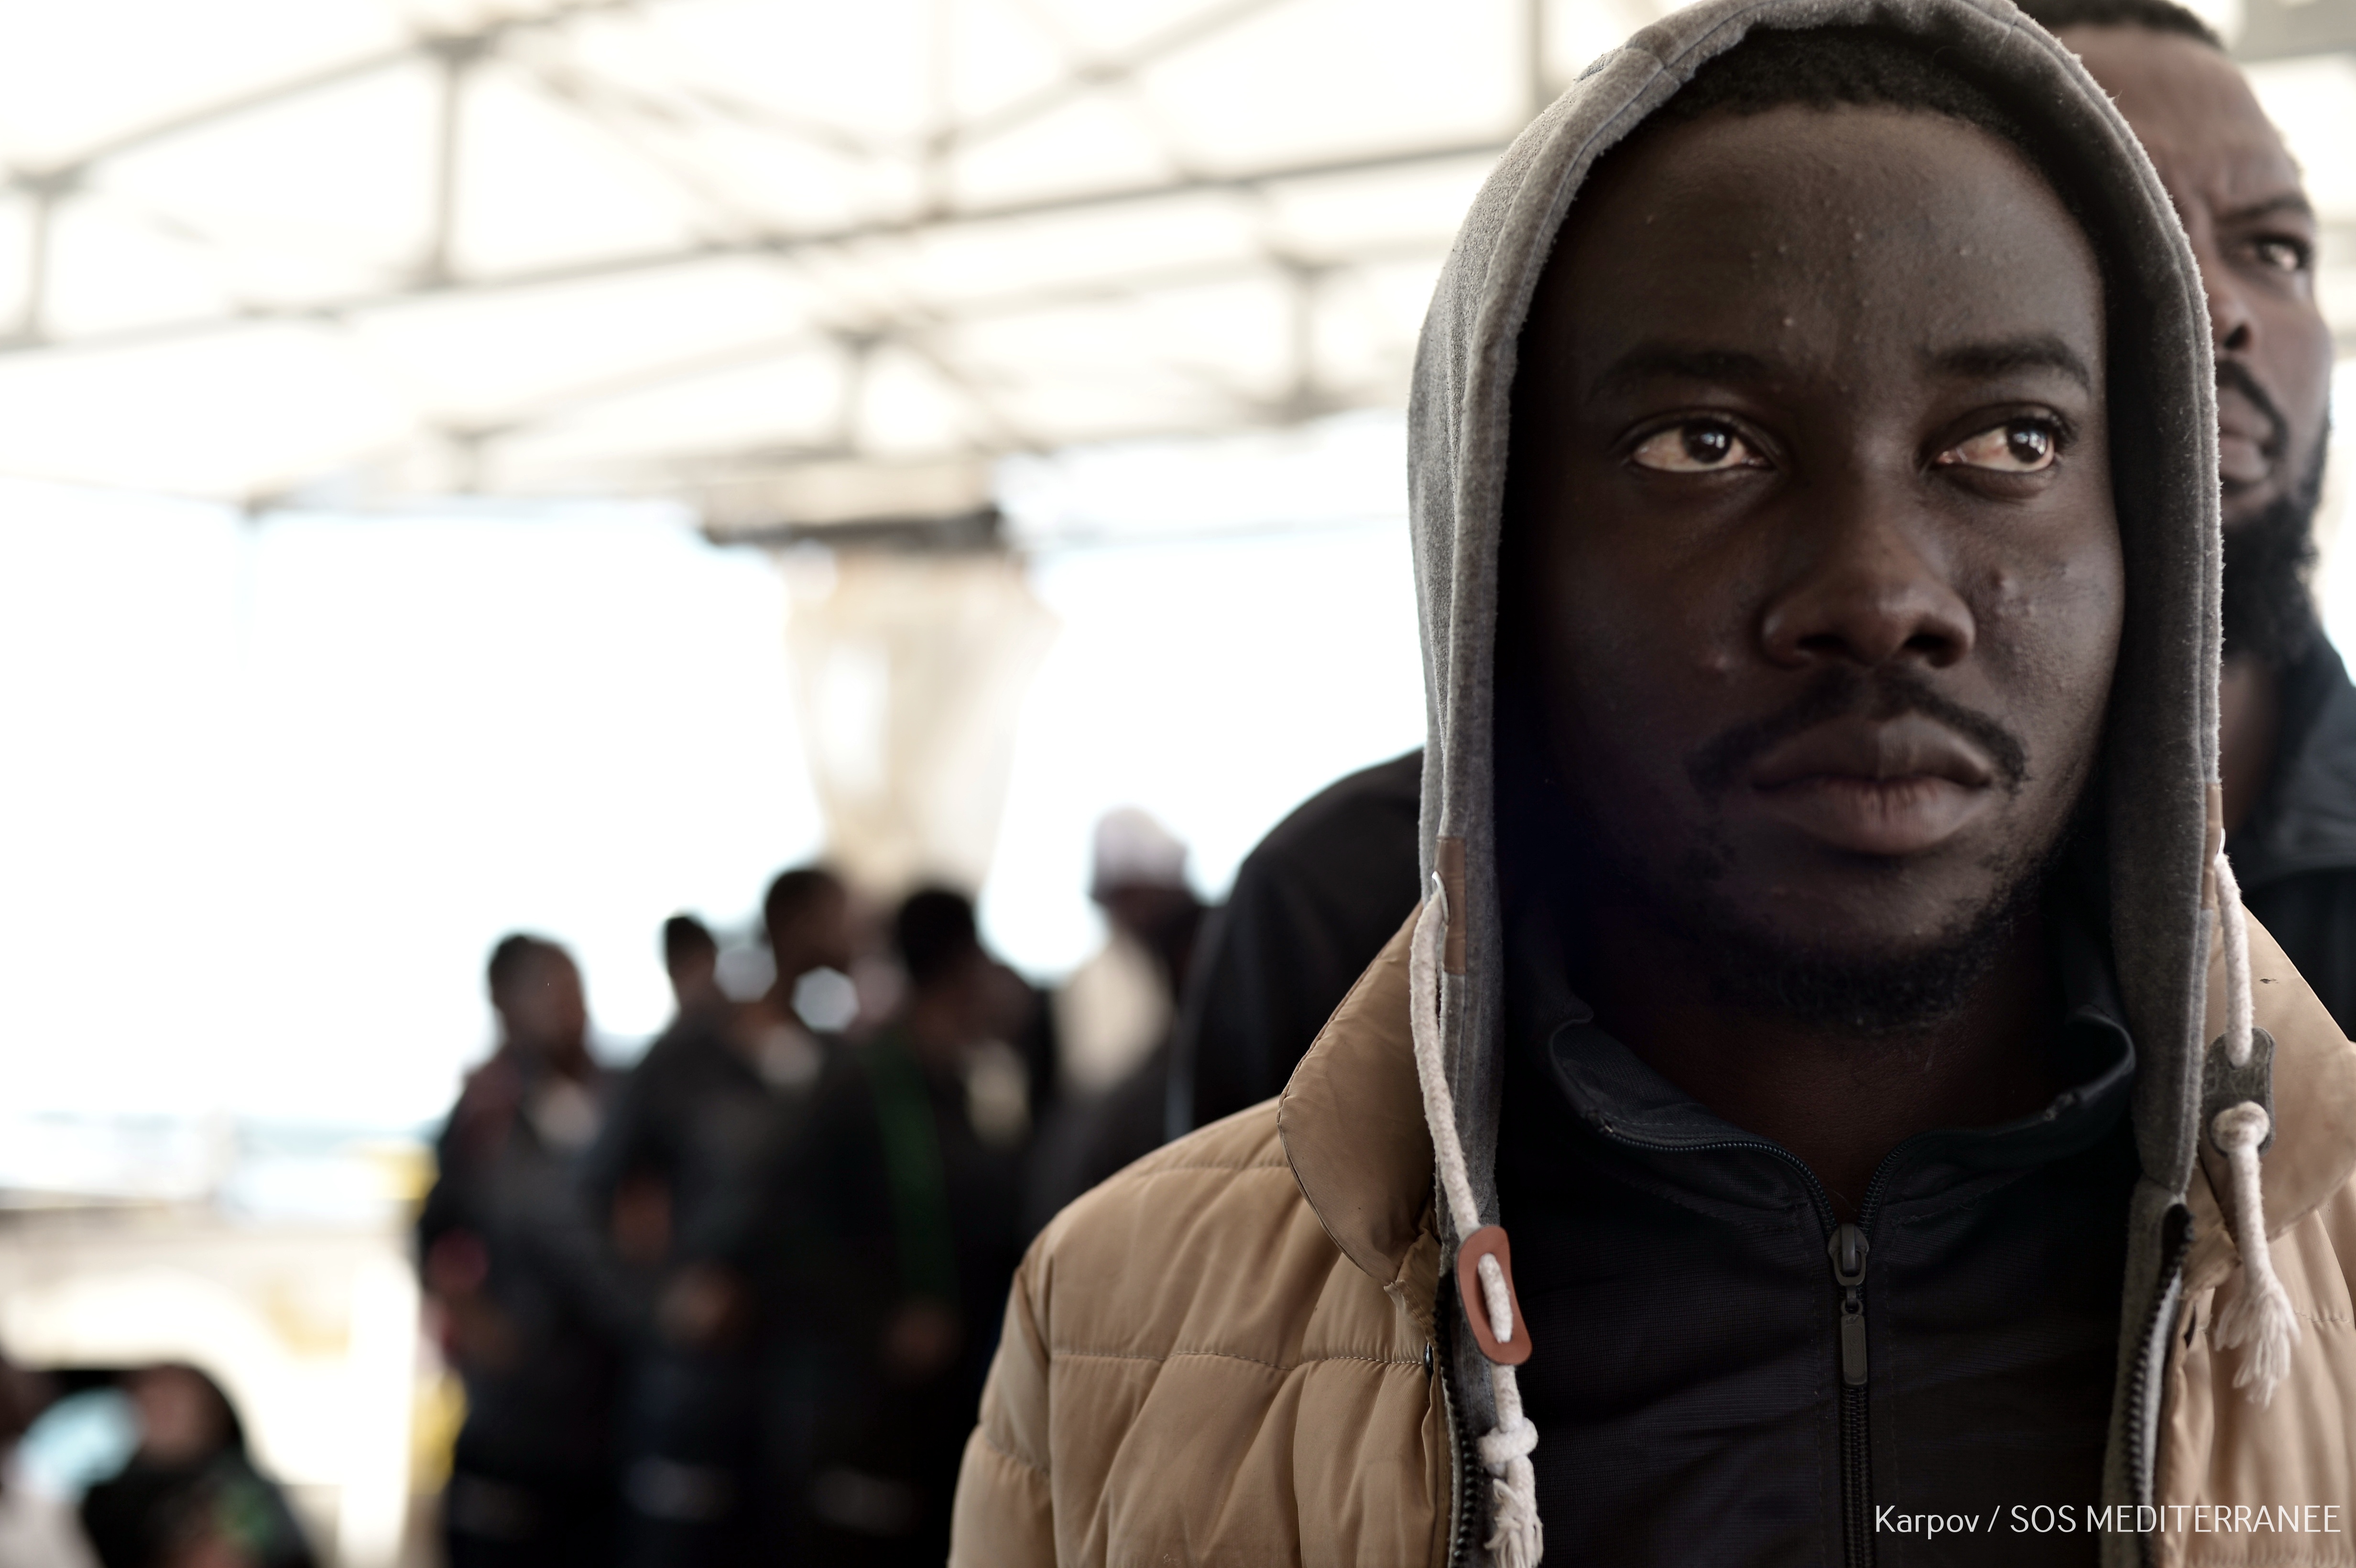 Migrants arrive in Valencia after Italy rejects offering safe port (by Kenny Karpov-MSF)